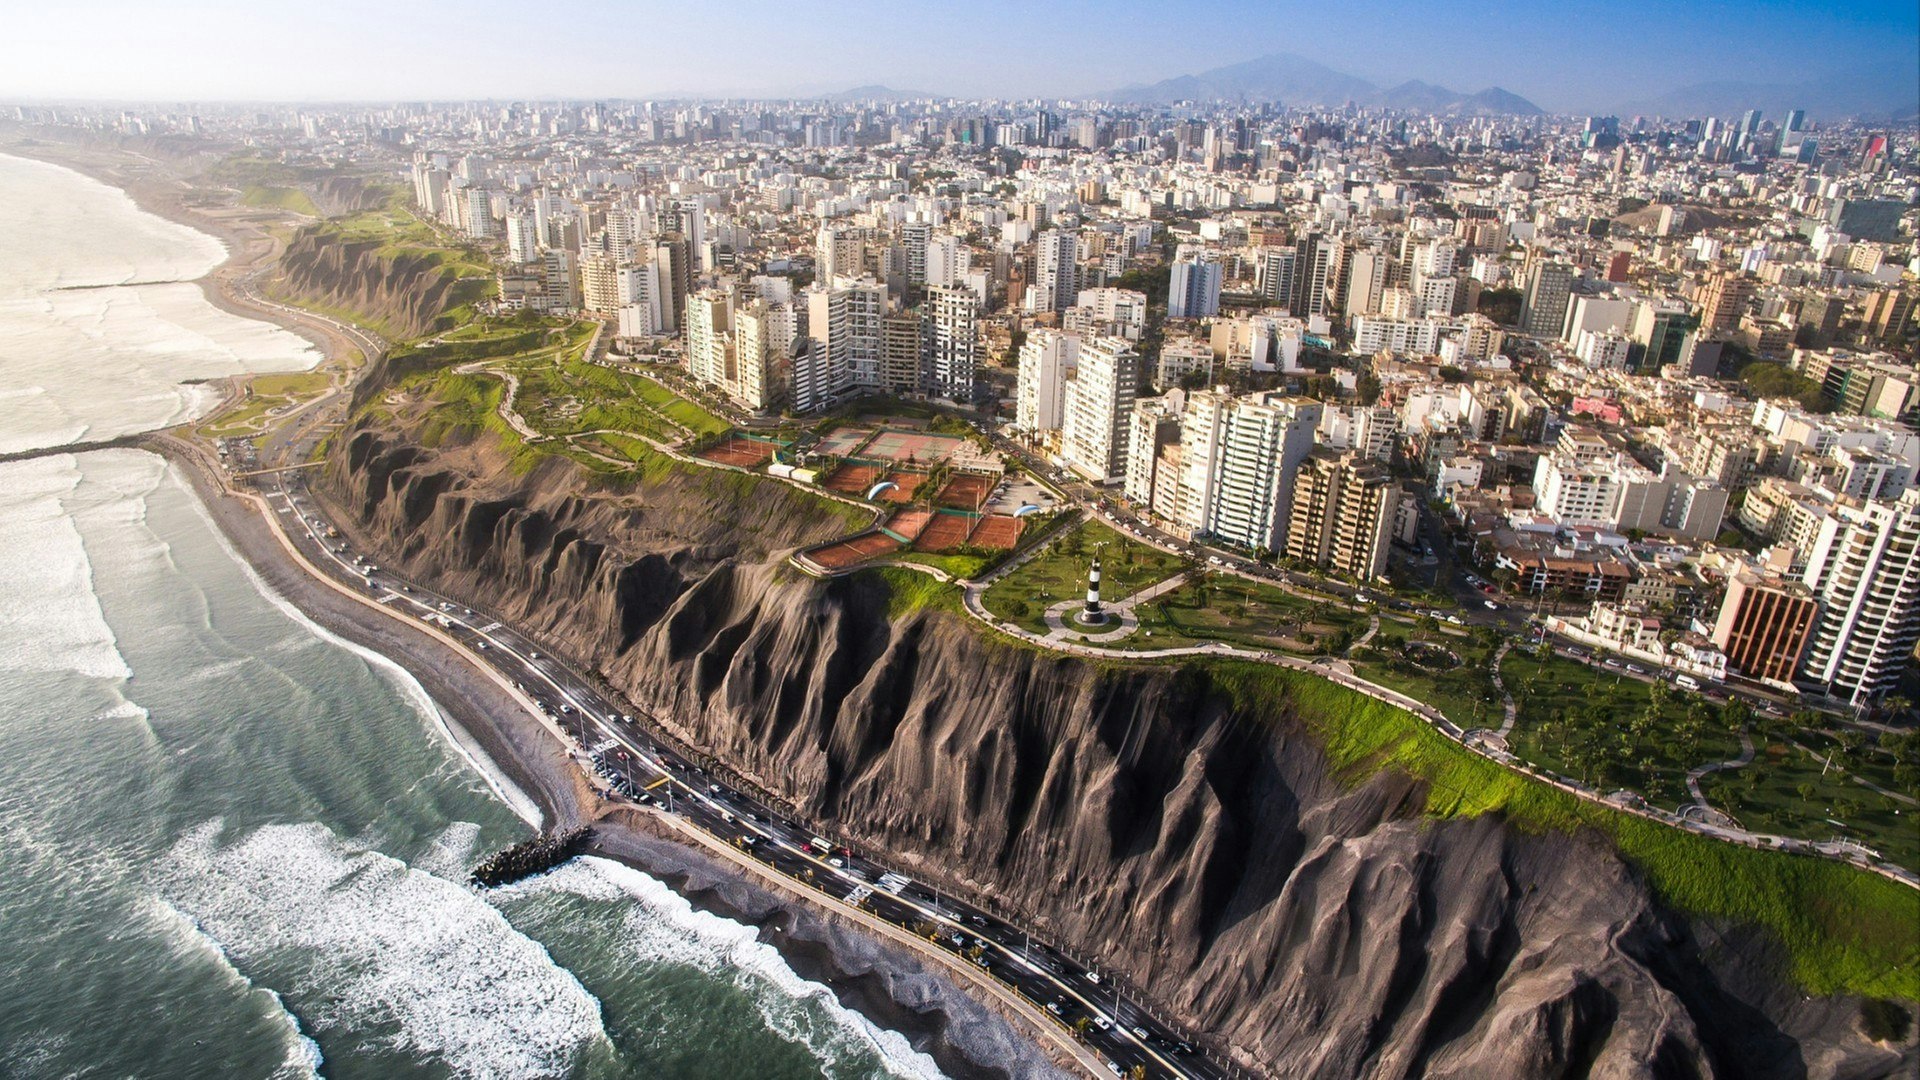 Panoramic view of Lima from Miraflores.